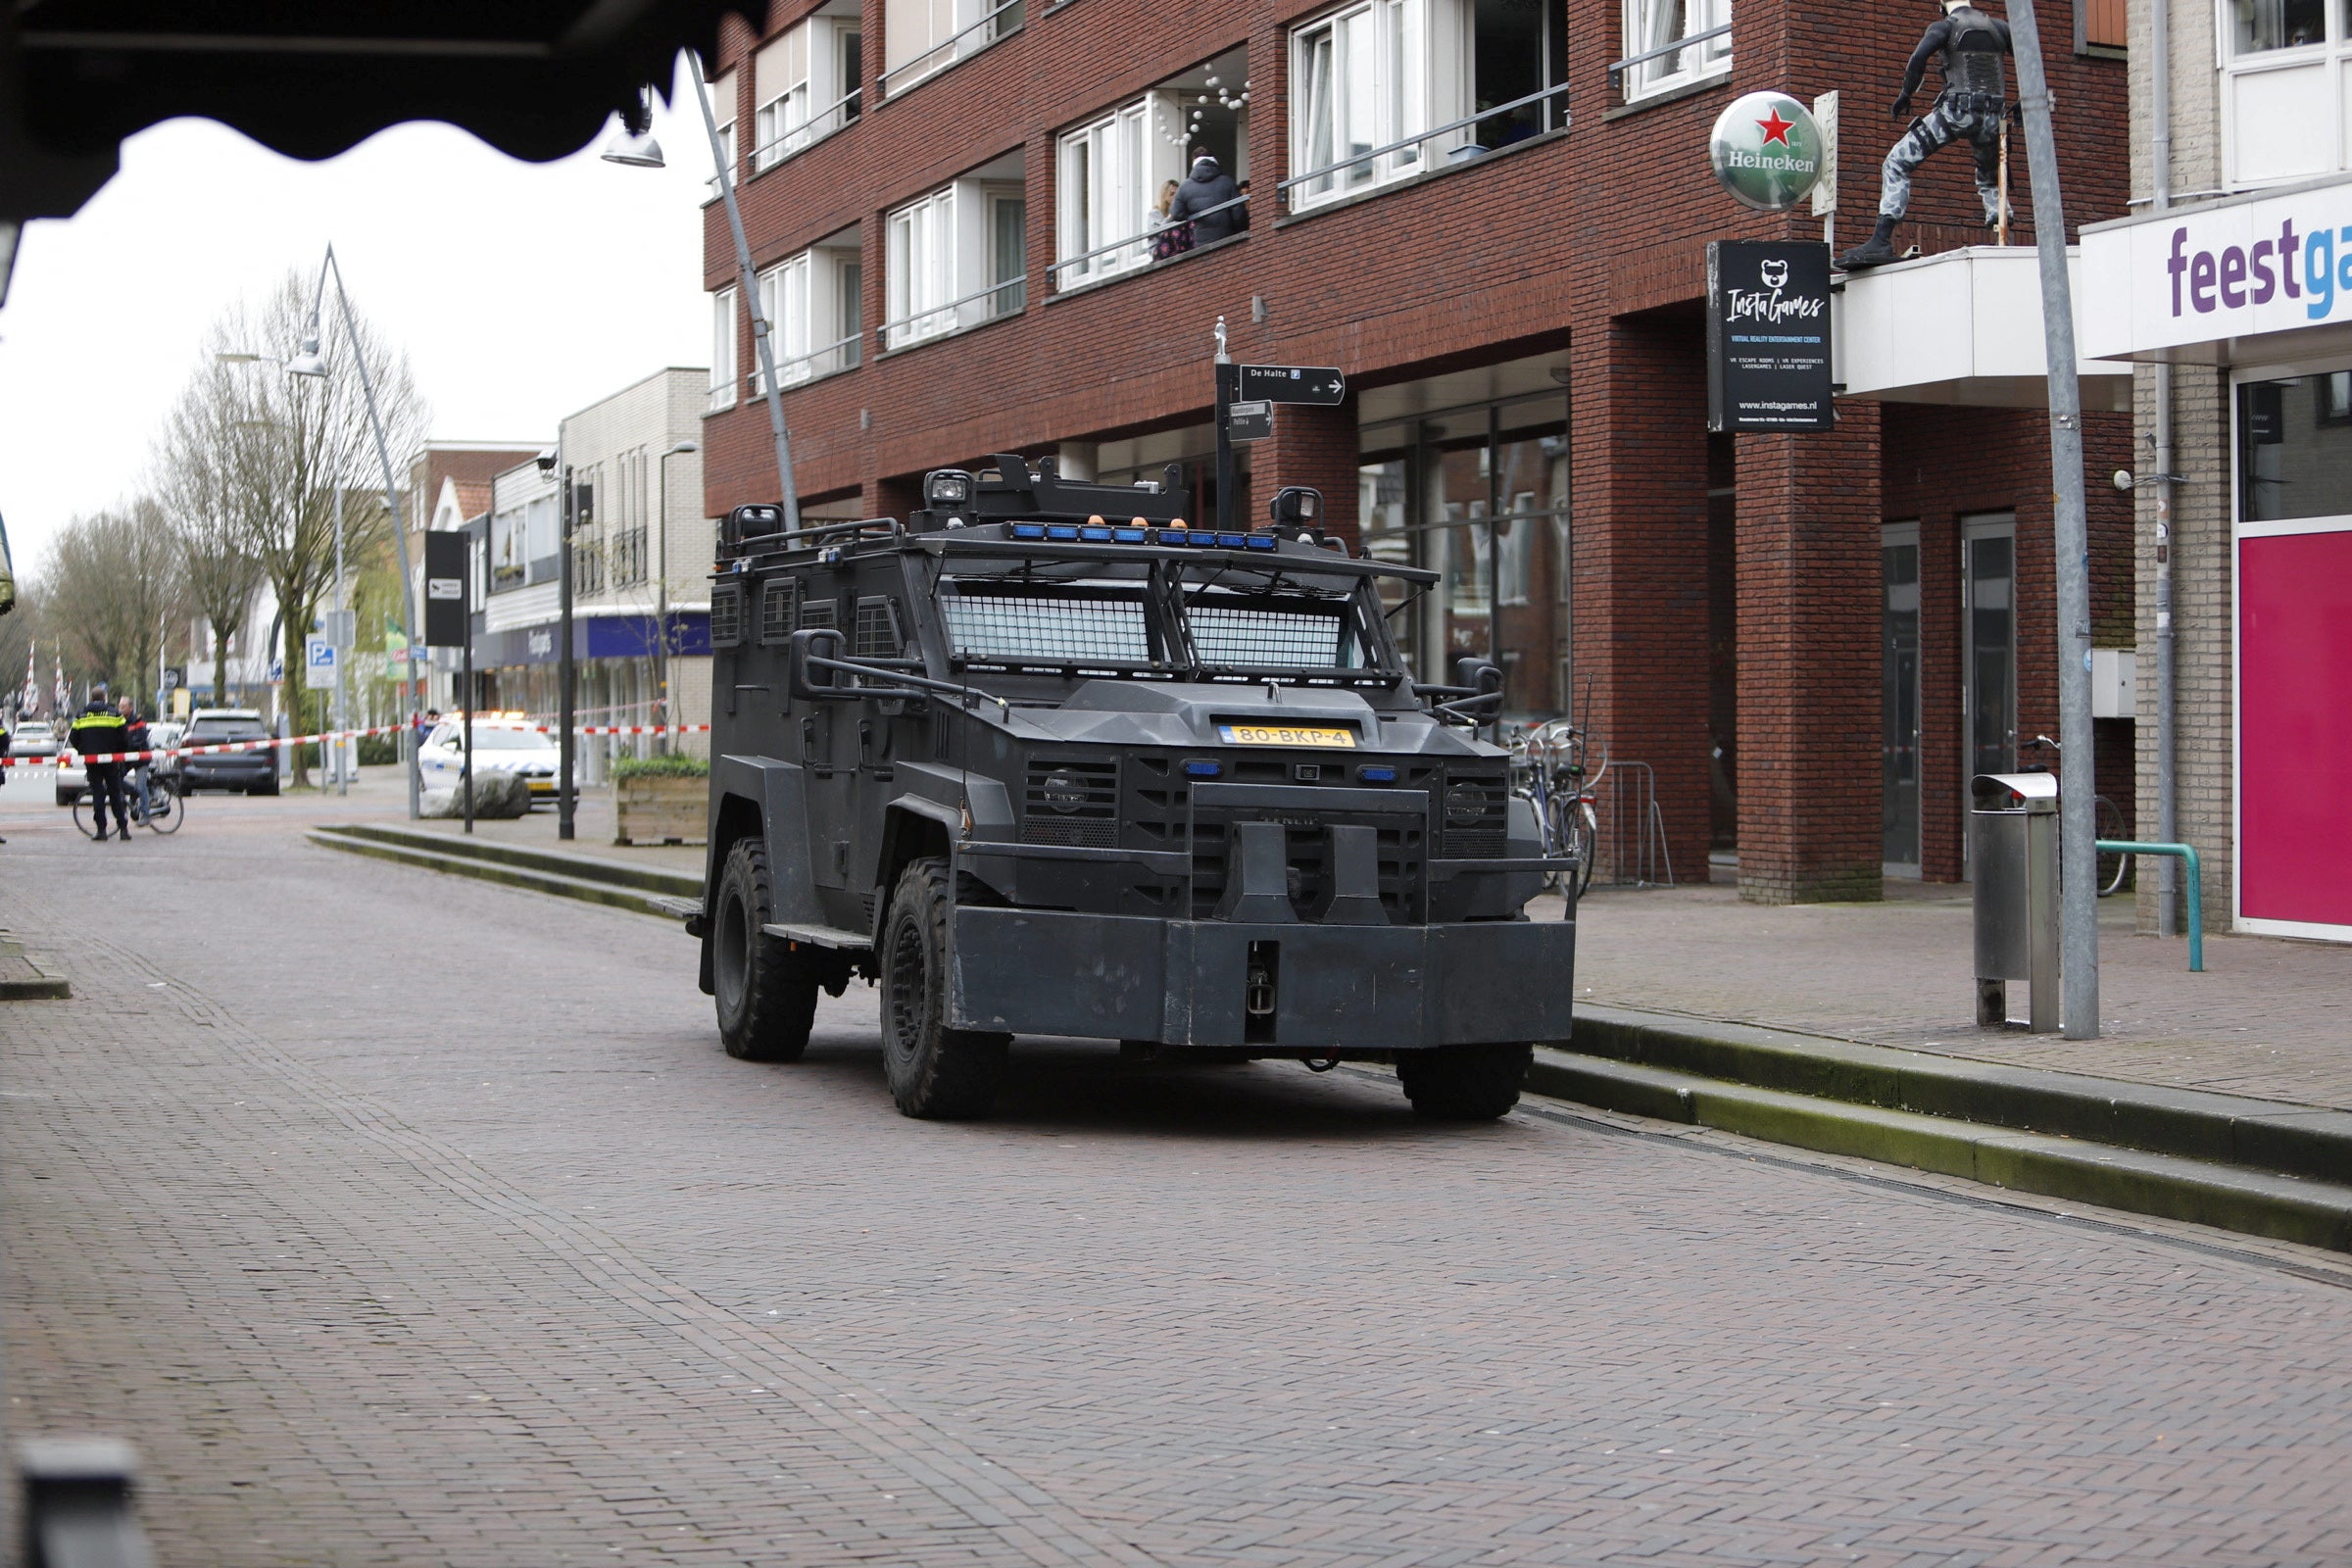 A view shows an armoured vehicle parked on the street near the Cafe Petticoat